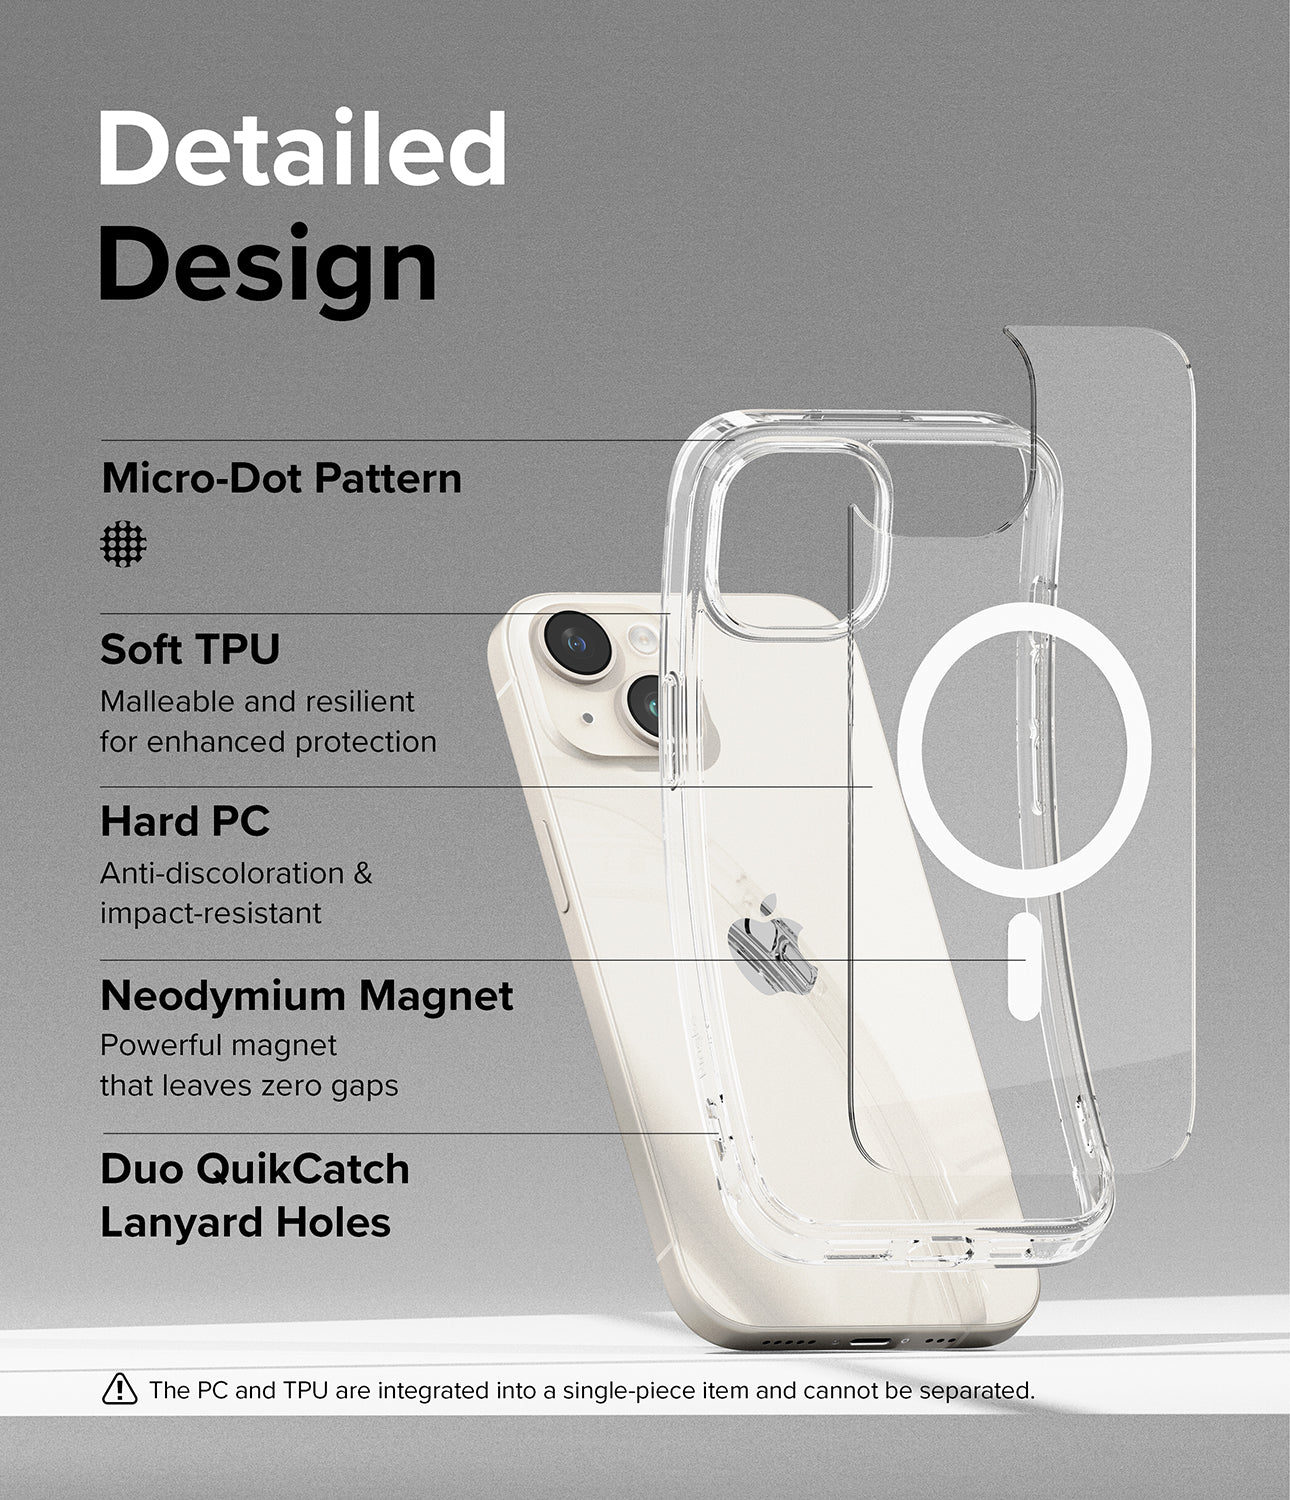 iPhone 15 Plus Case | Fusion Magnetic - Detailed Design. Micro-Dot Pattern. Malleable and resilient for enhanced protection with Soft TPU. Anti-discoloration and impact-resistant with Hard PC. Powerful neodymium magnet that leaves zero gaps. Duo QuikCatch Lanyard Holes.